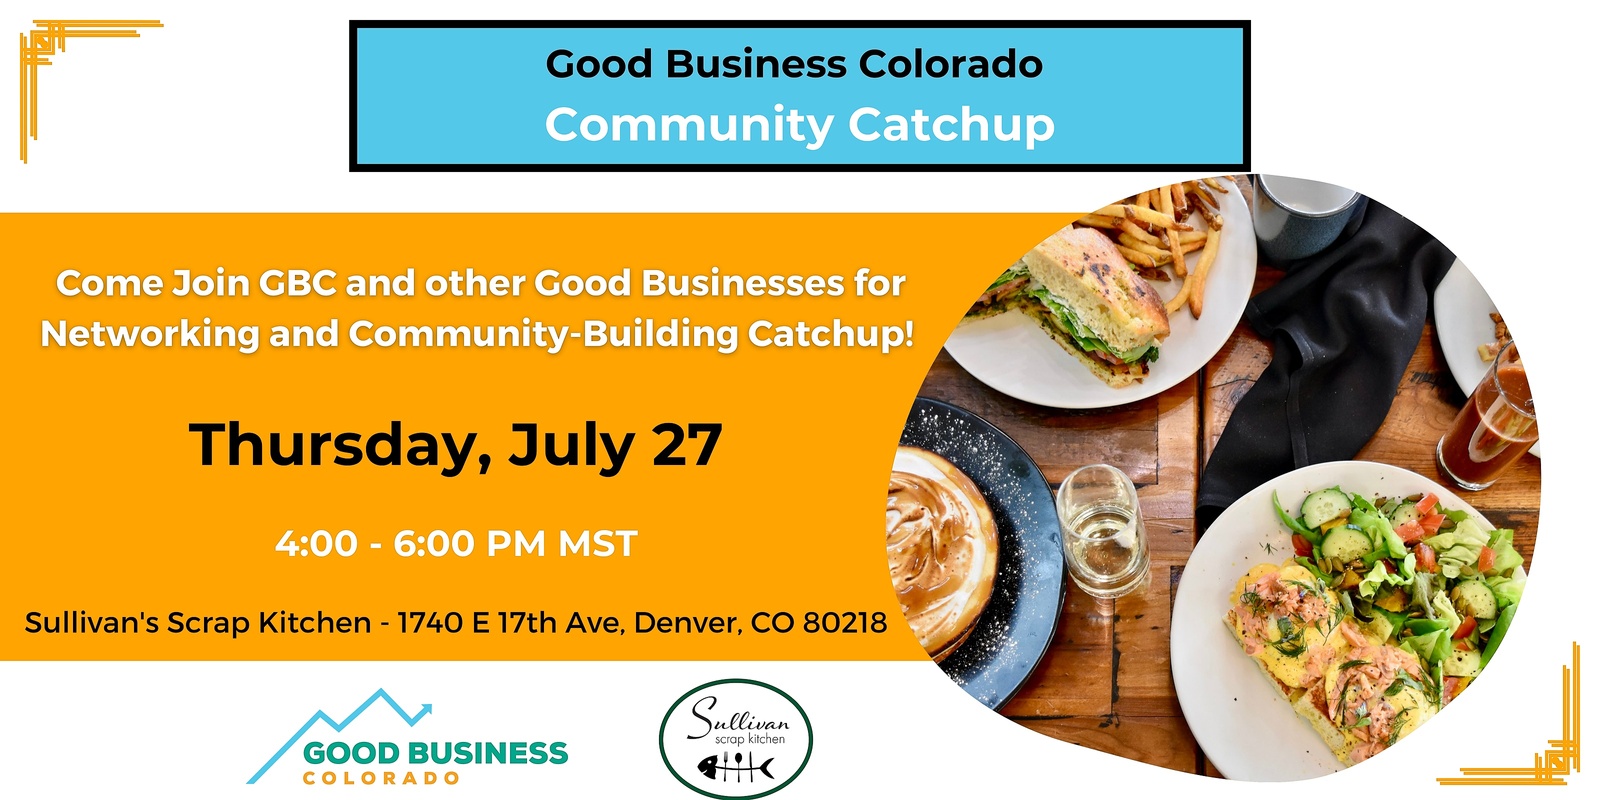 Banner image for Good Business Colorado Community Catchup